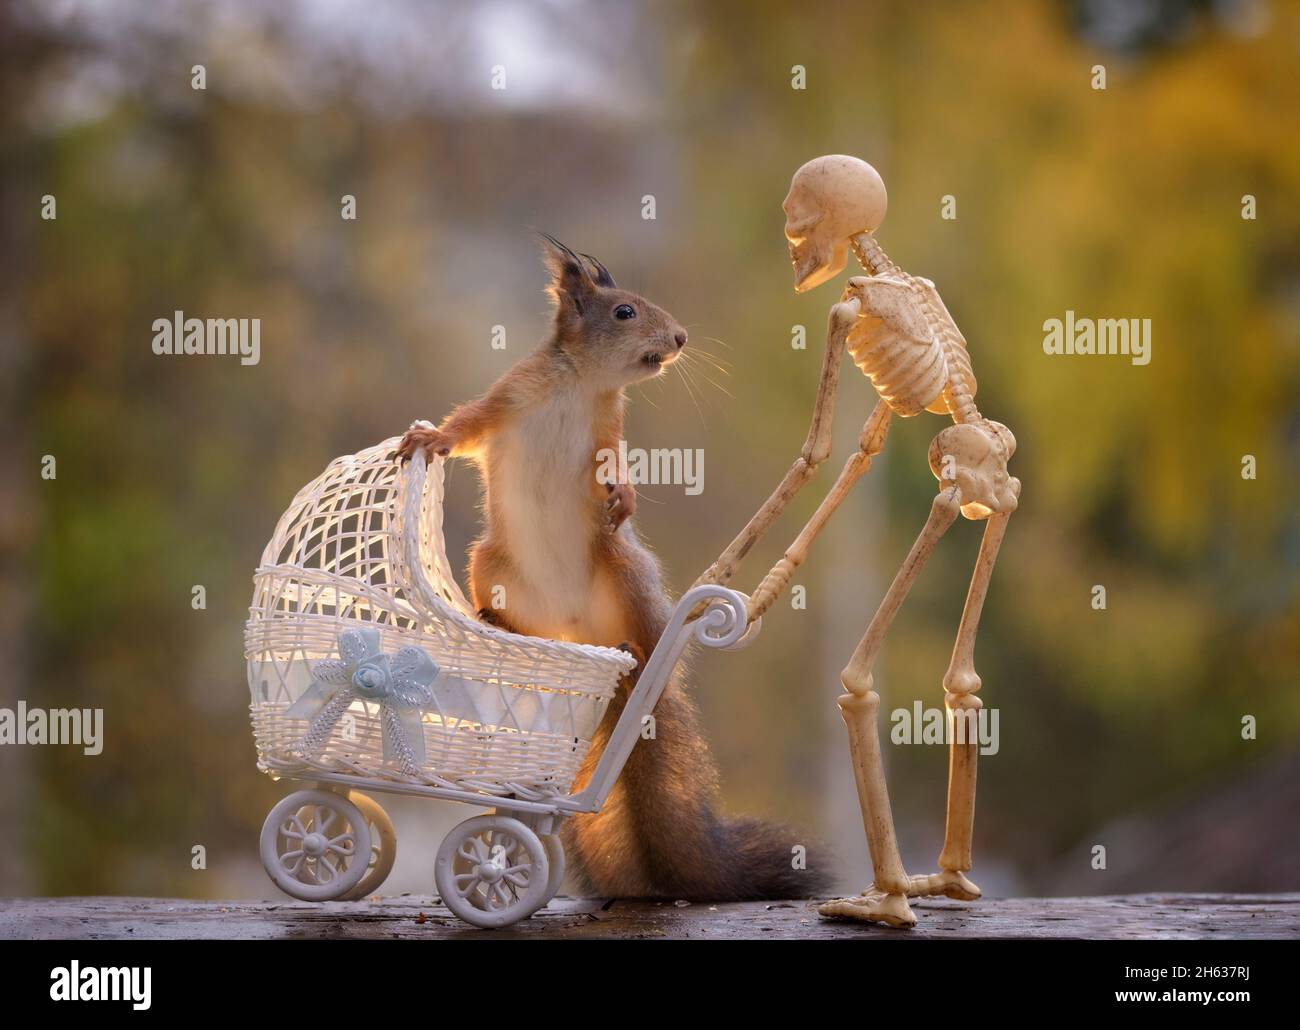 red squirrel sitting in a stroller with a skeleton Stock Photo